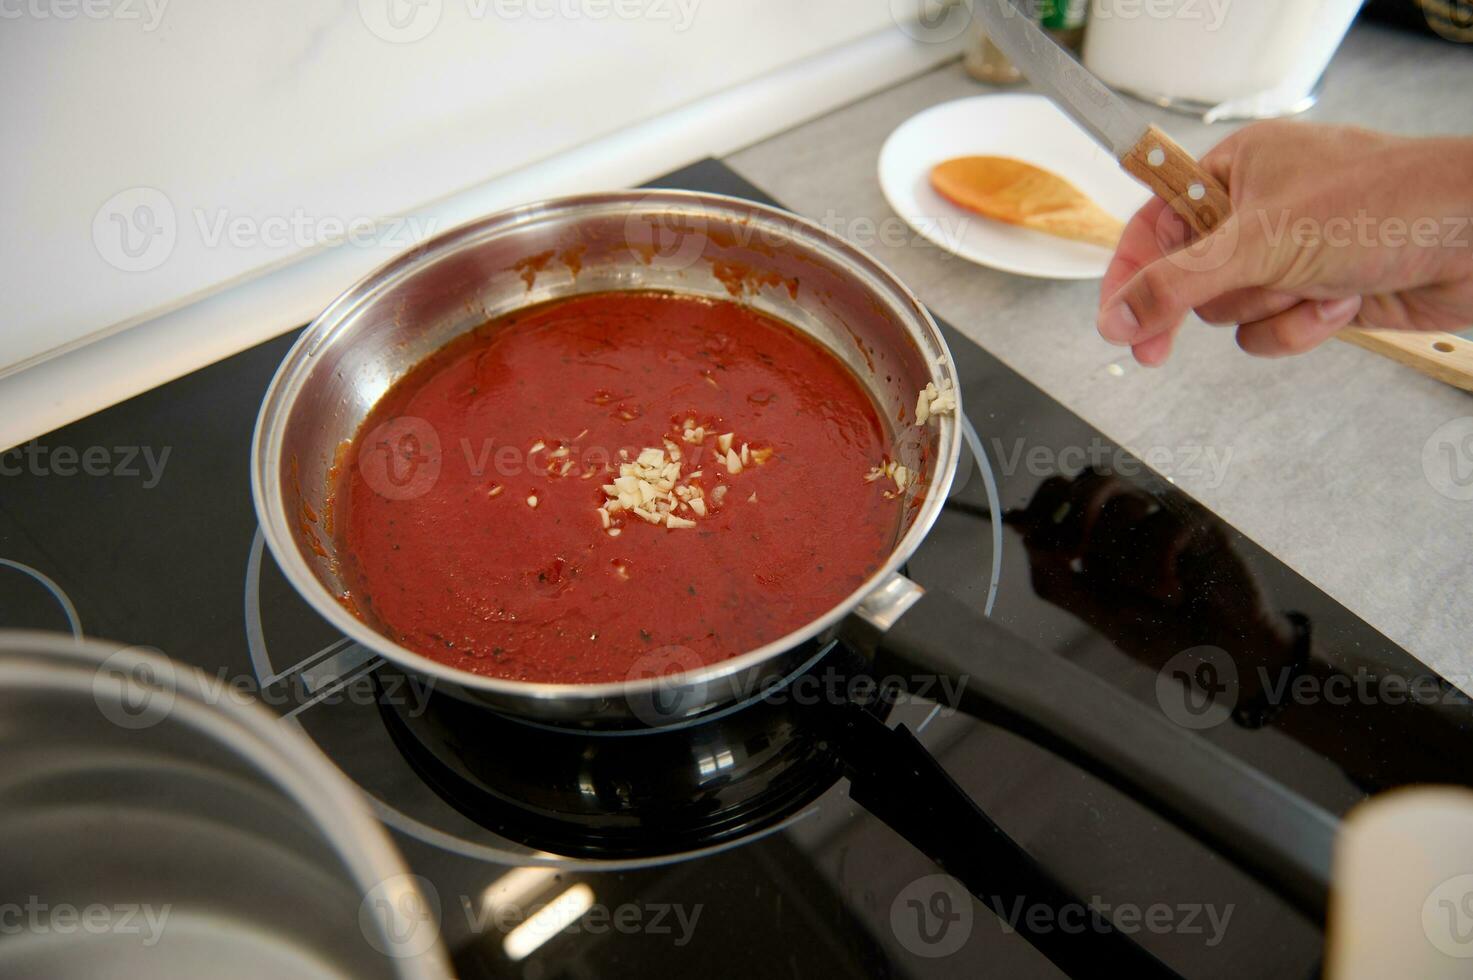 View from above of a saucepan with tomato sauce and chopped garlic, on the electric stove in the home kitchen. Close-up photo